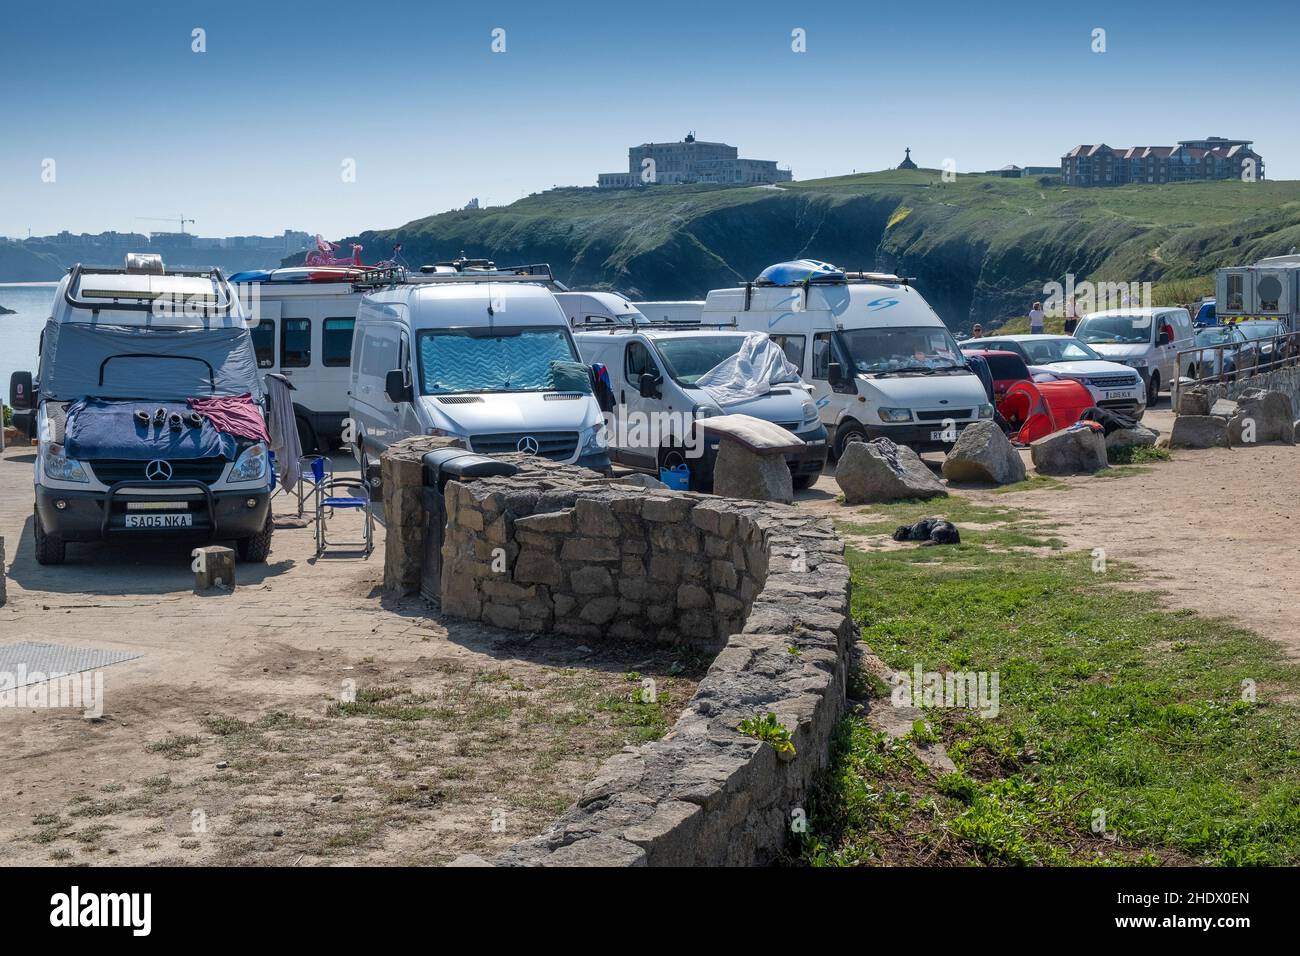 Van lifers and staycation holidaymakers fill the car park on Towan Head in Newquay in Cornwall. Stock Photo